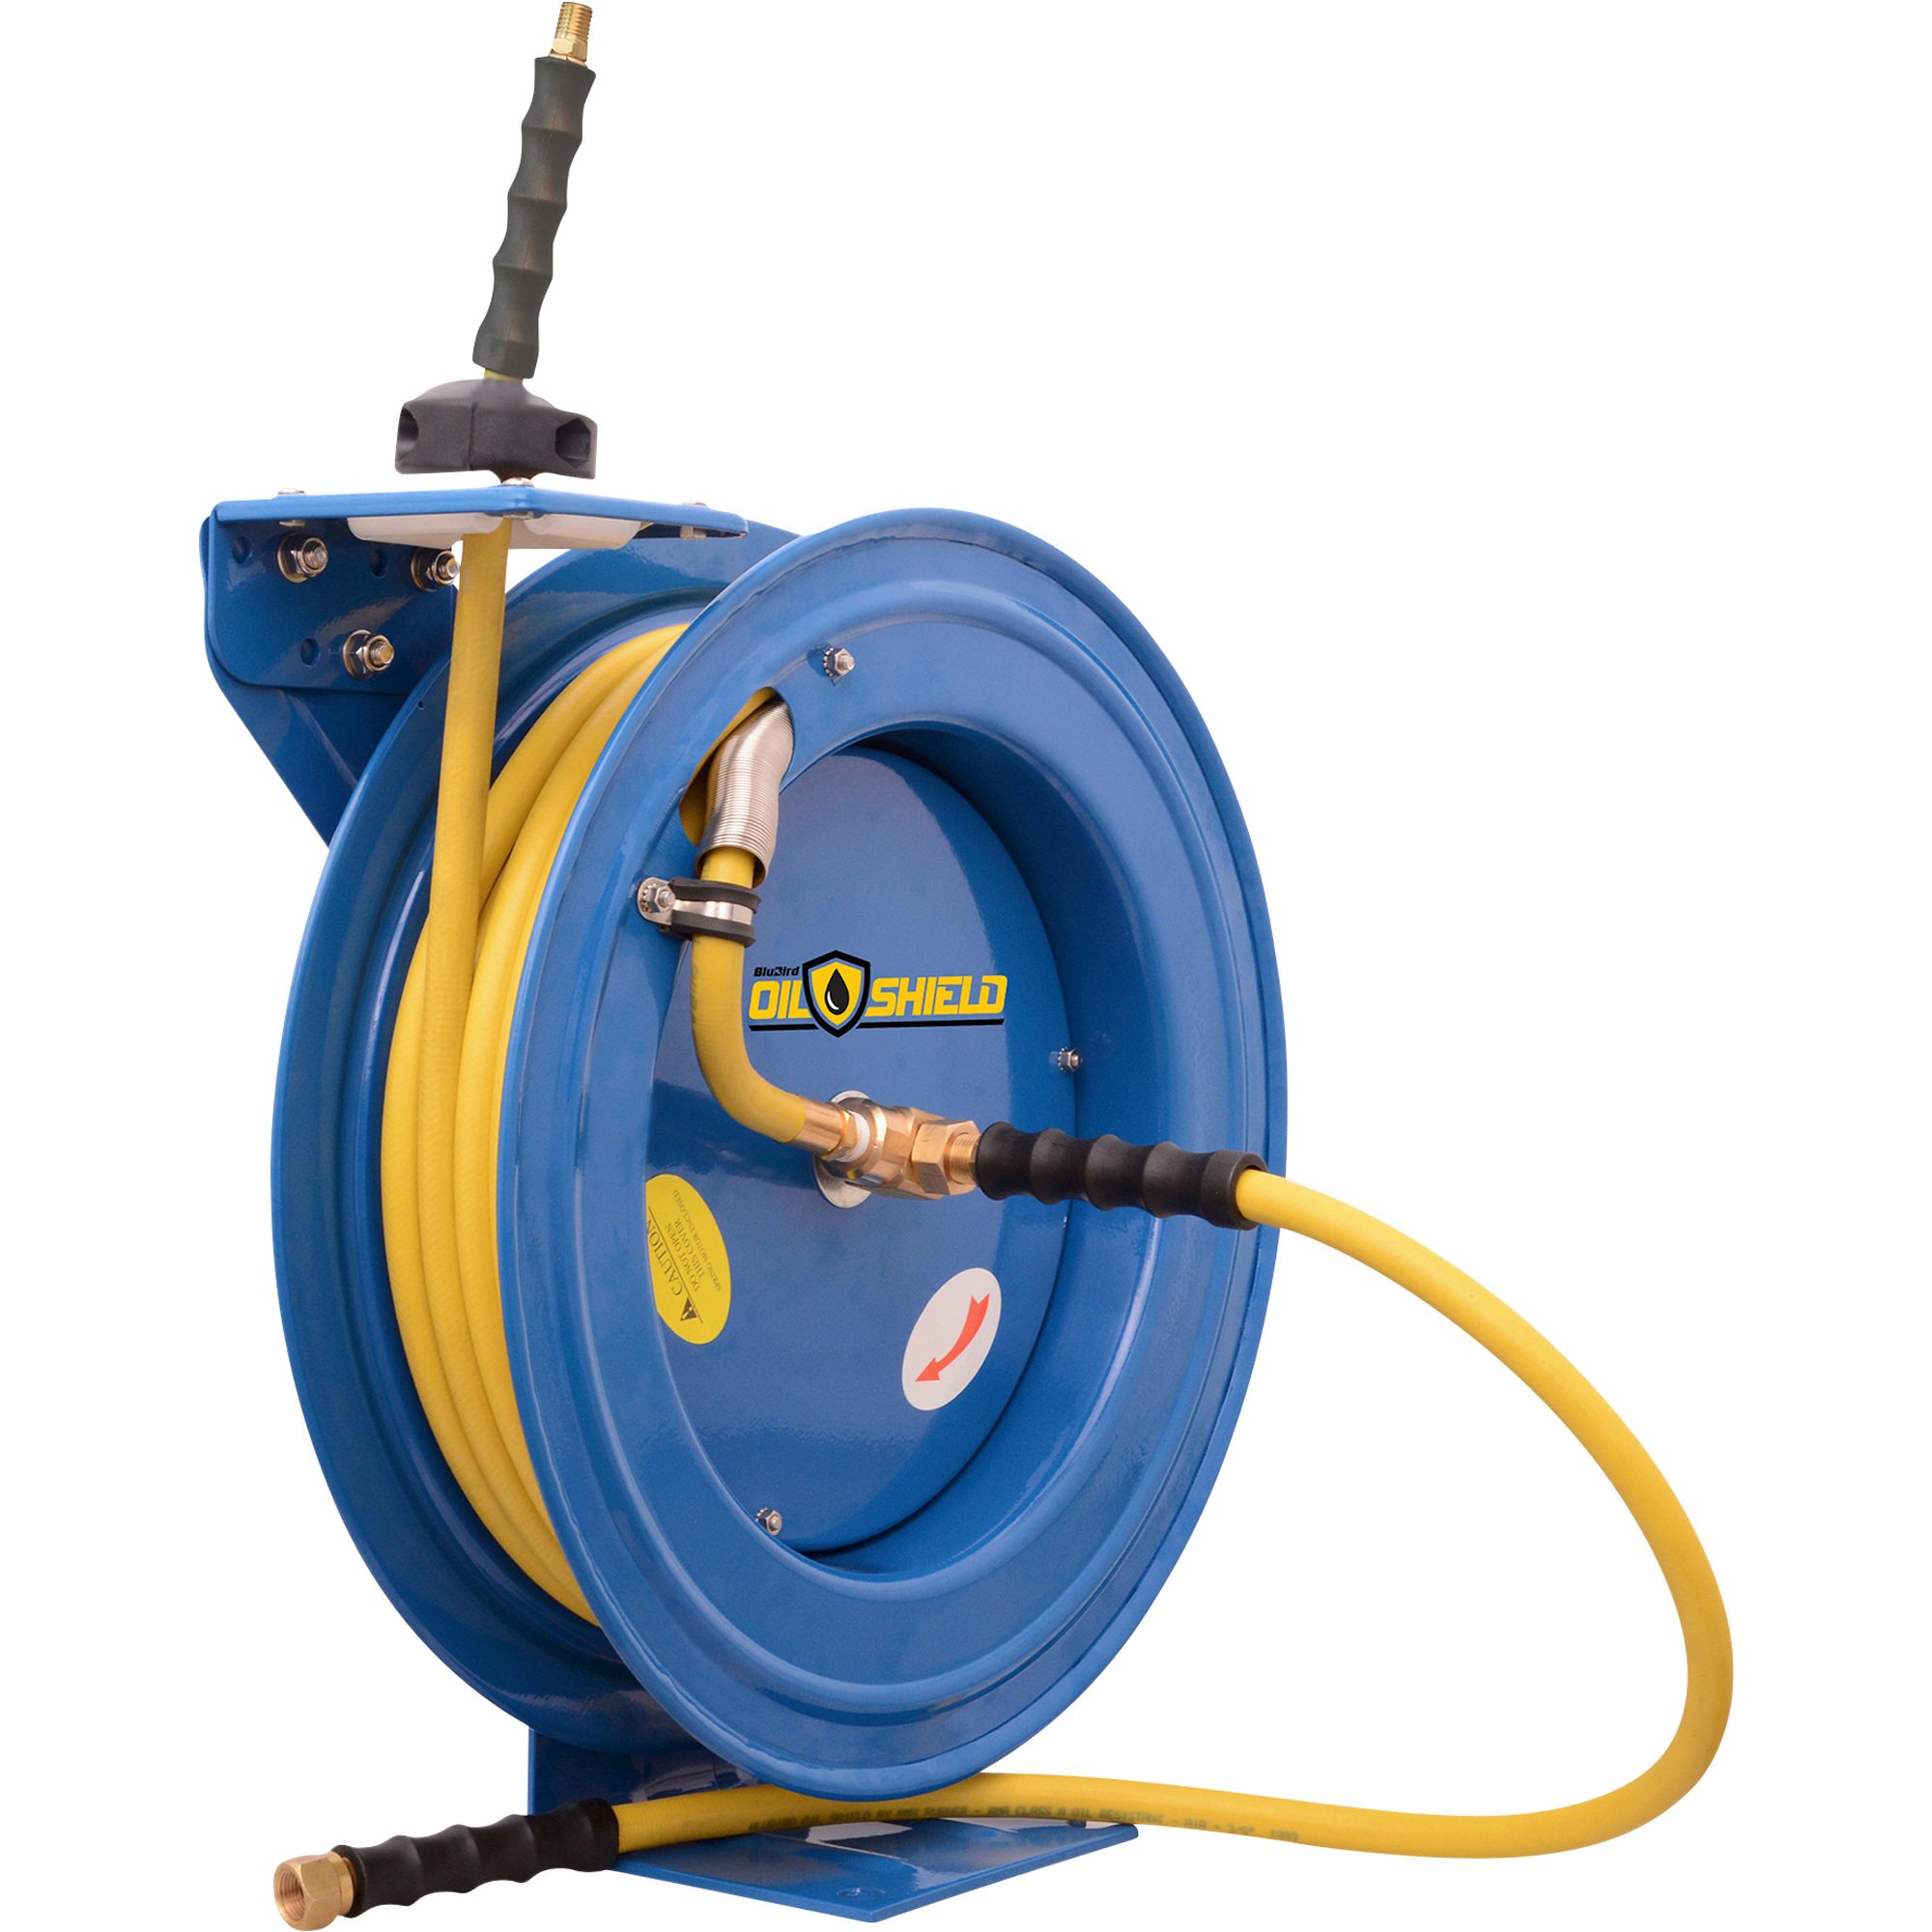 Oil Shield Retractable Air Hose Reel — With 1/2in. x 50ft. Rubber